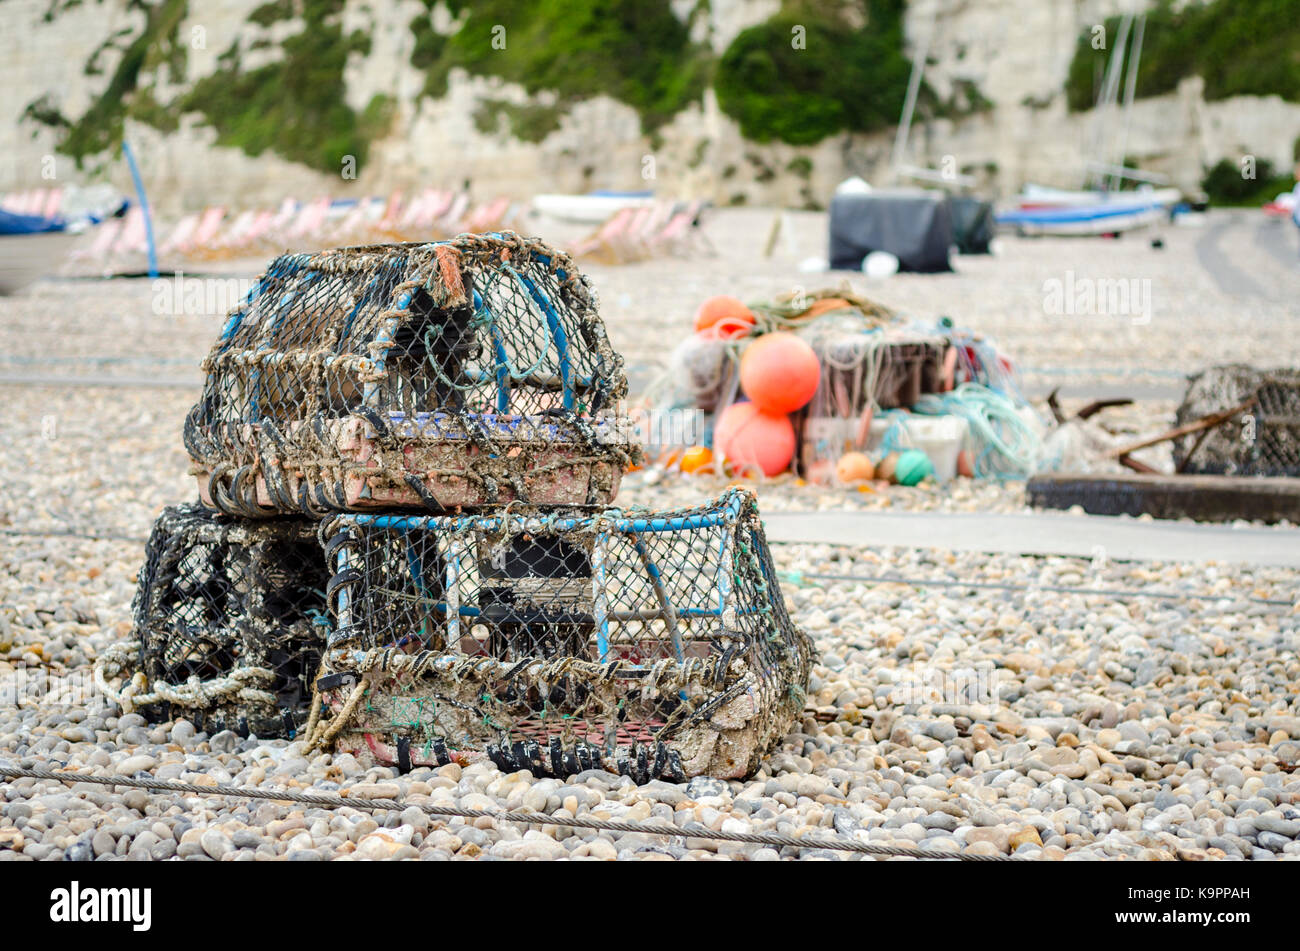 Fishing equipment lobster pots and crab boxes on the beach in Beer, Devon, England Stock Photo